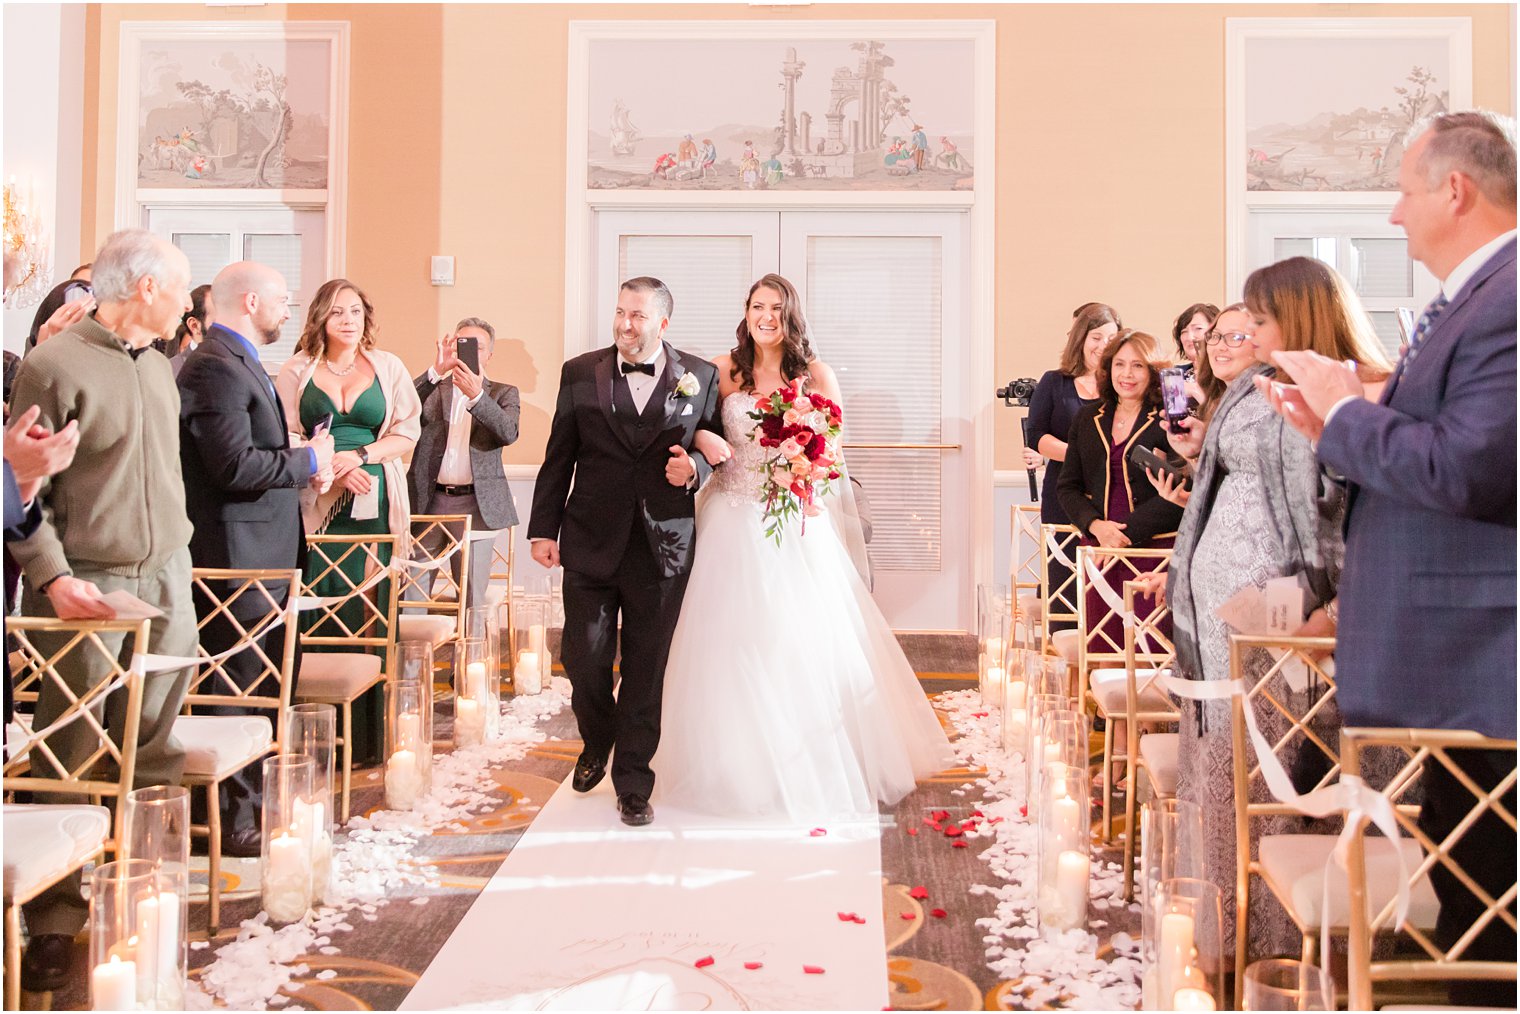 The Palace at Somerset Park wedding ceremony photographed by Idalia Photography